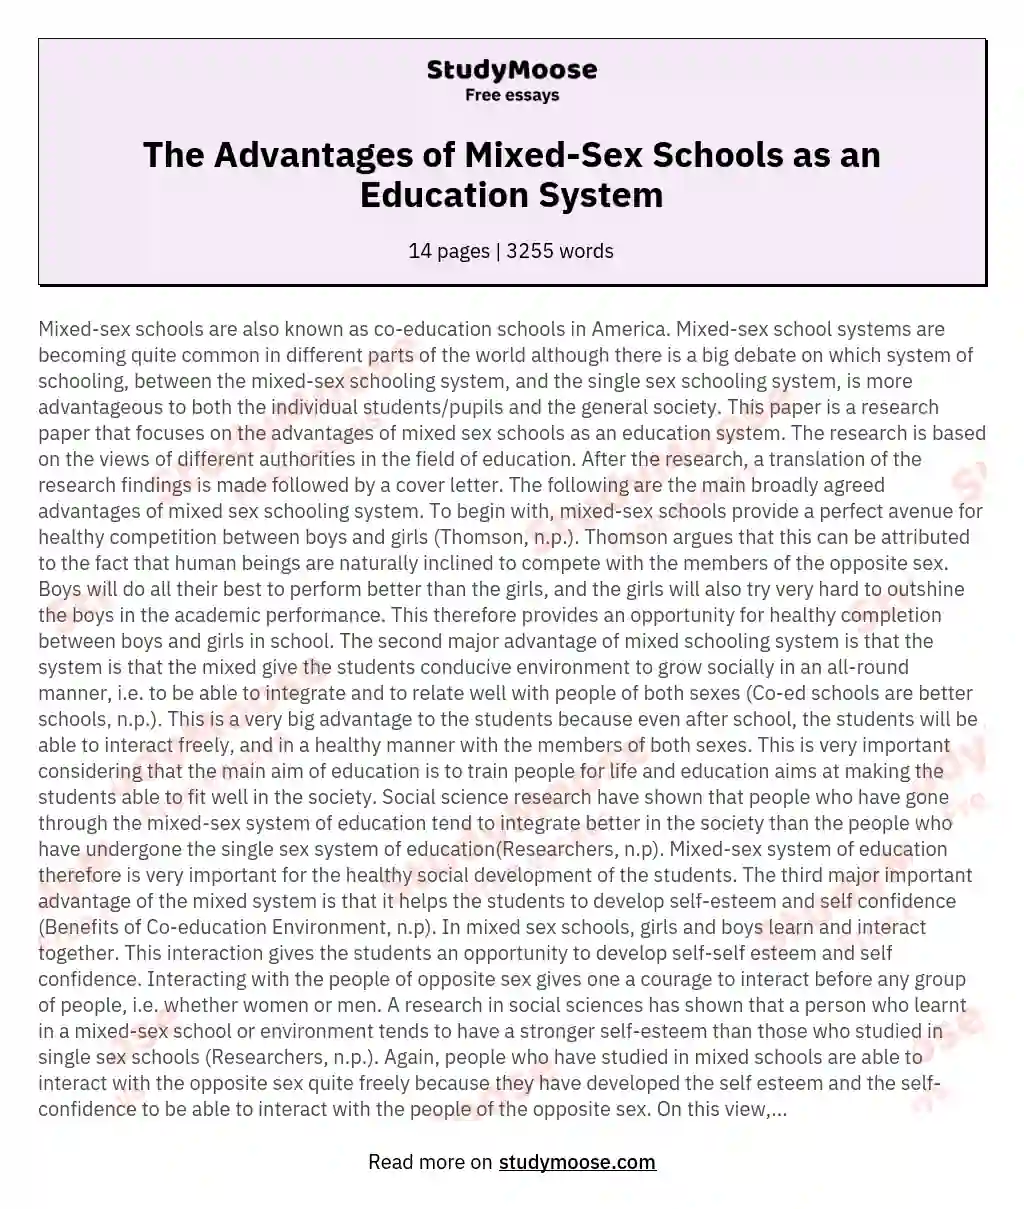 The Advantages of Mixed-Sex Schools as an Education System essay